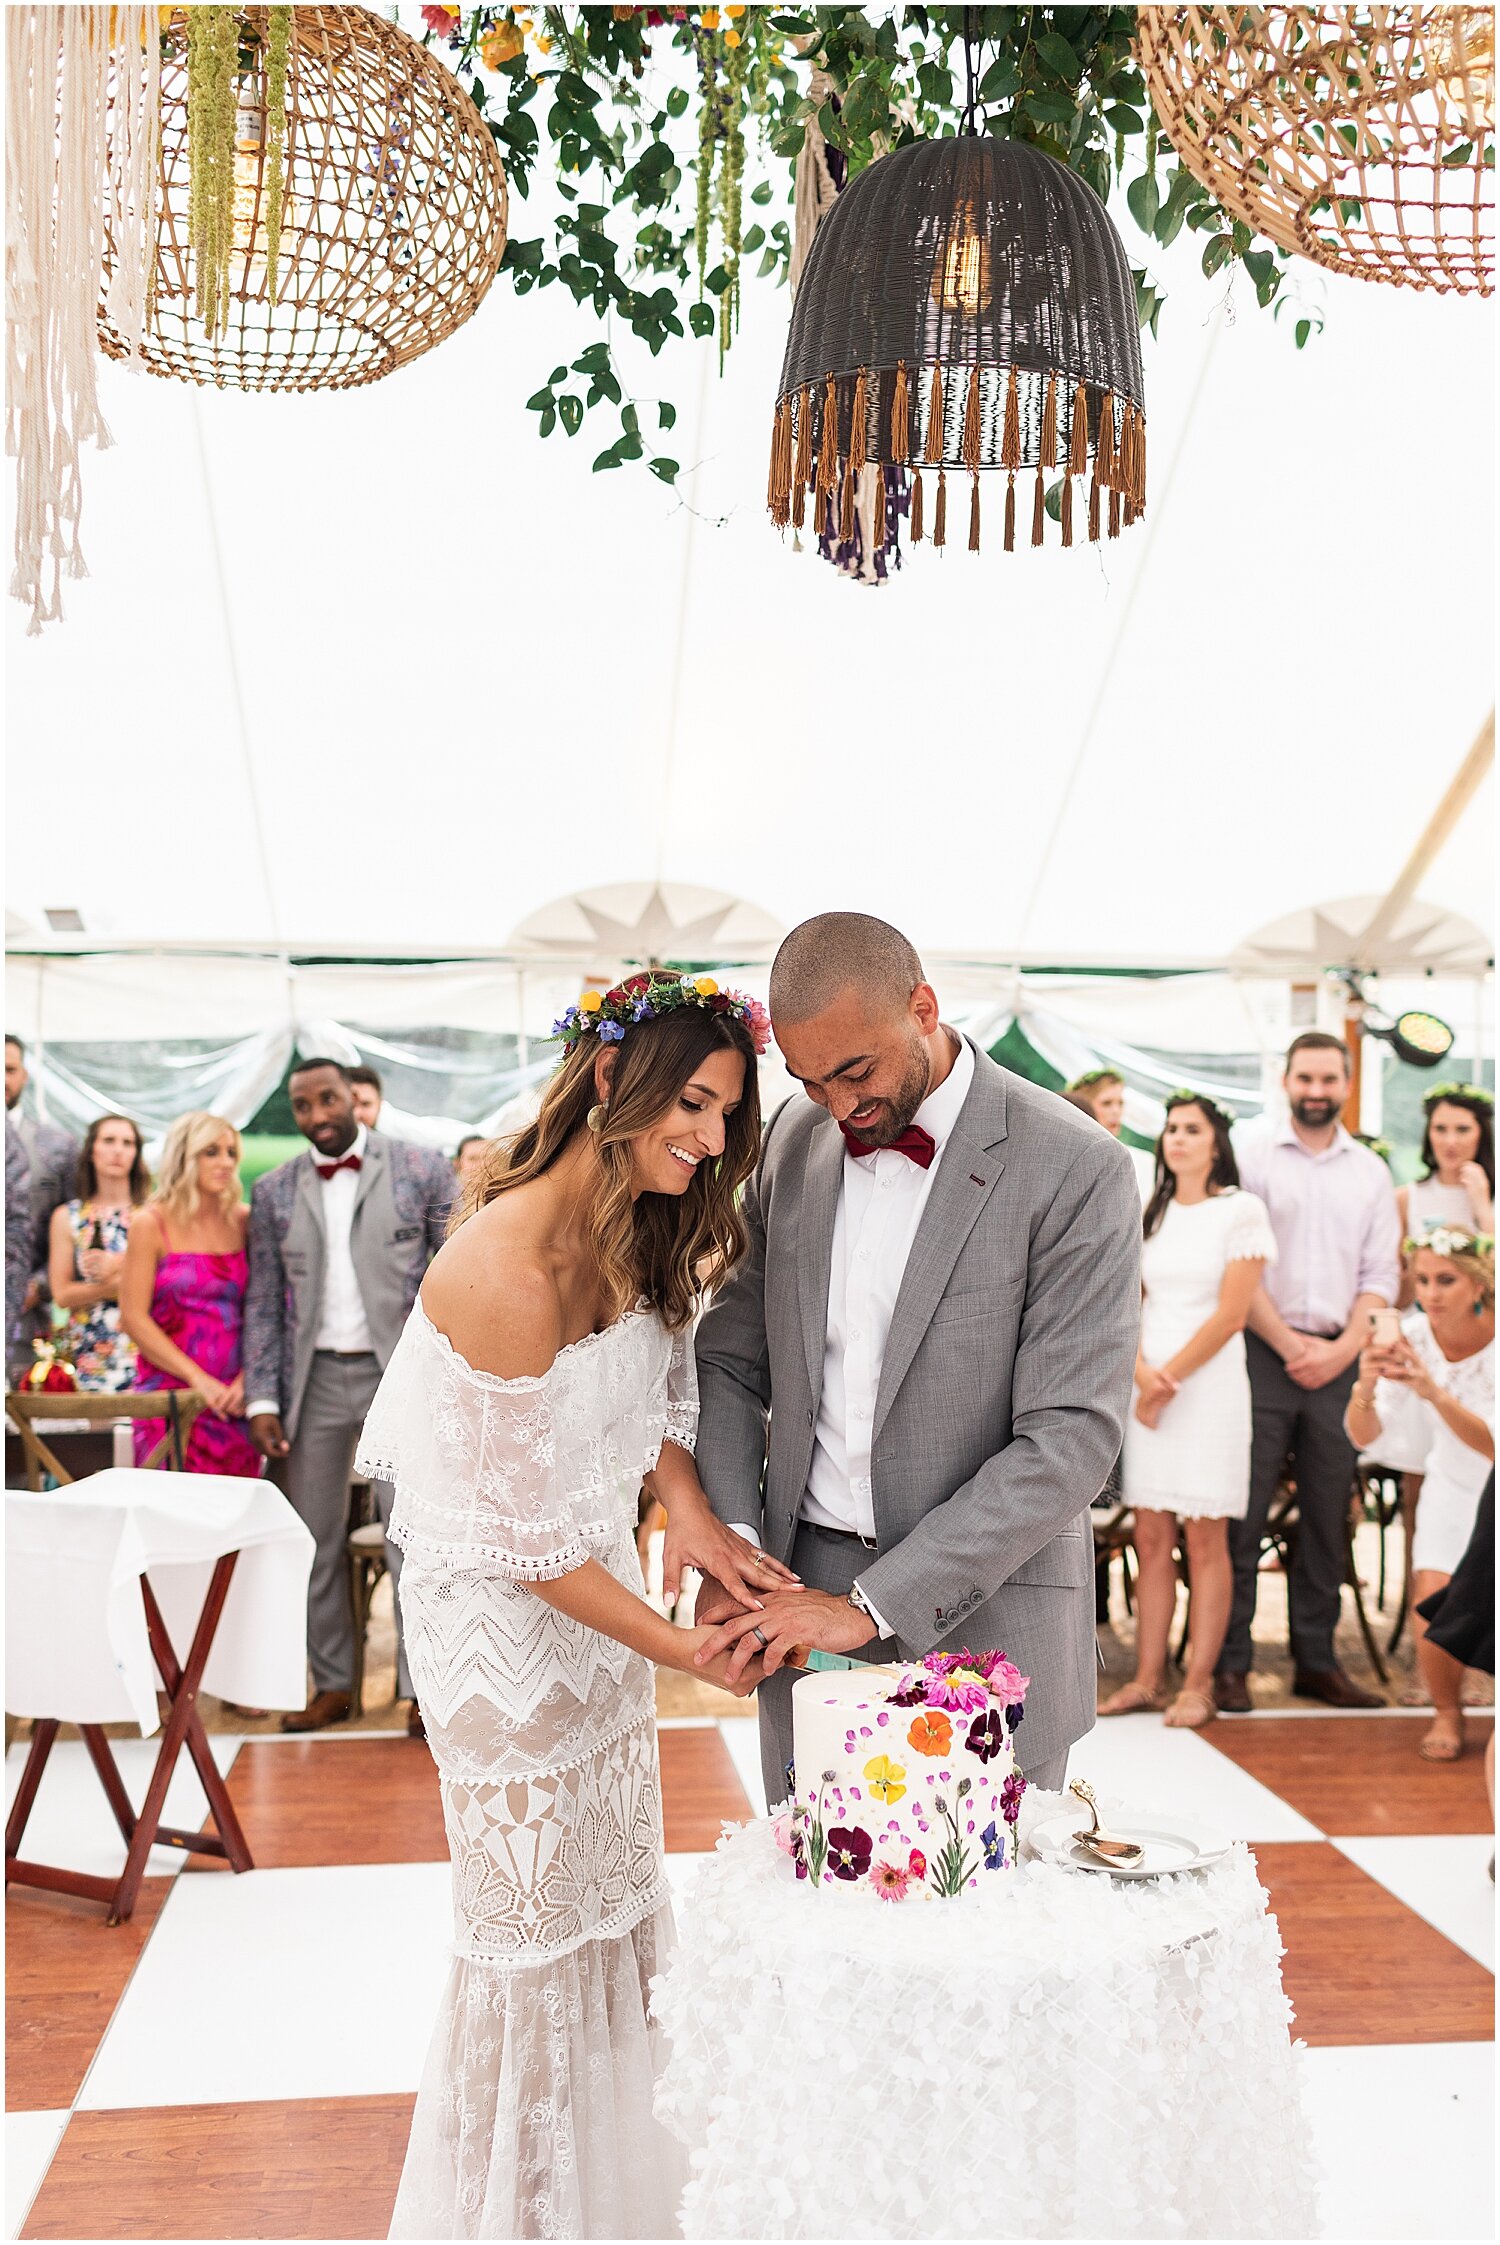 Bohemian Dream Tented Wedding by wedding planners A Charming Fete and Cleveland wedding photographer Lindsey Ramdin